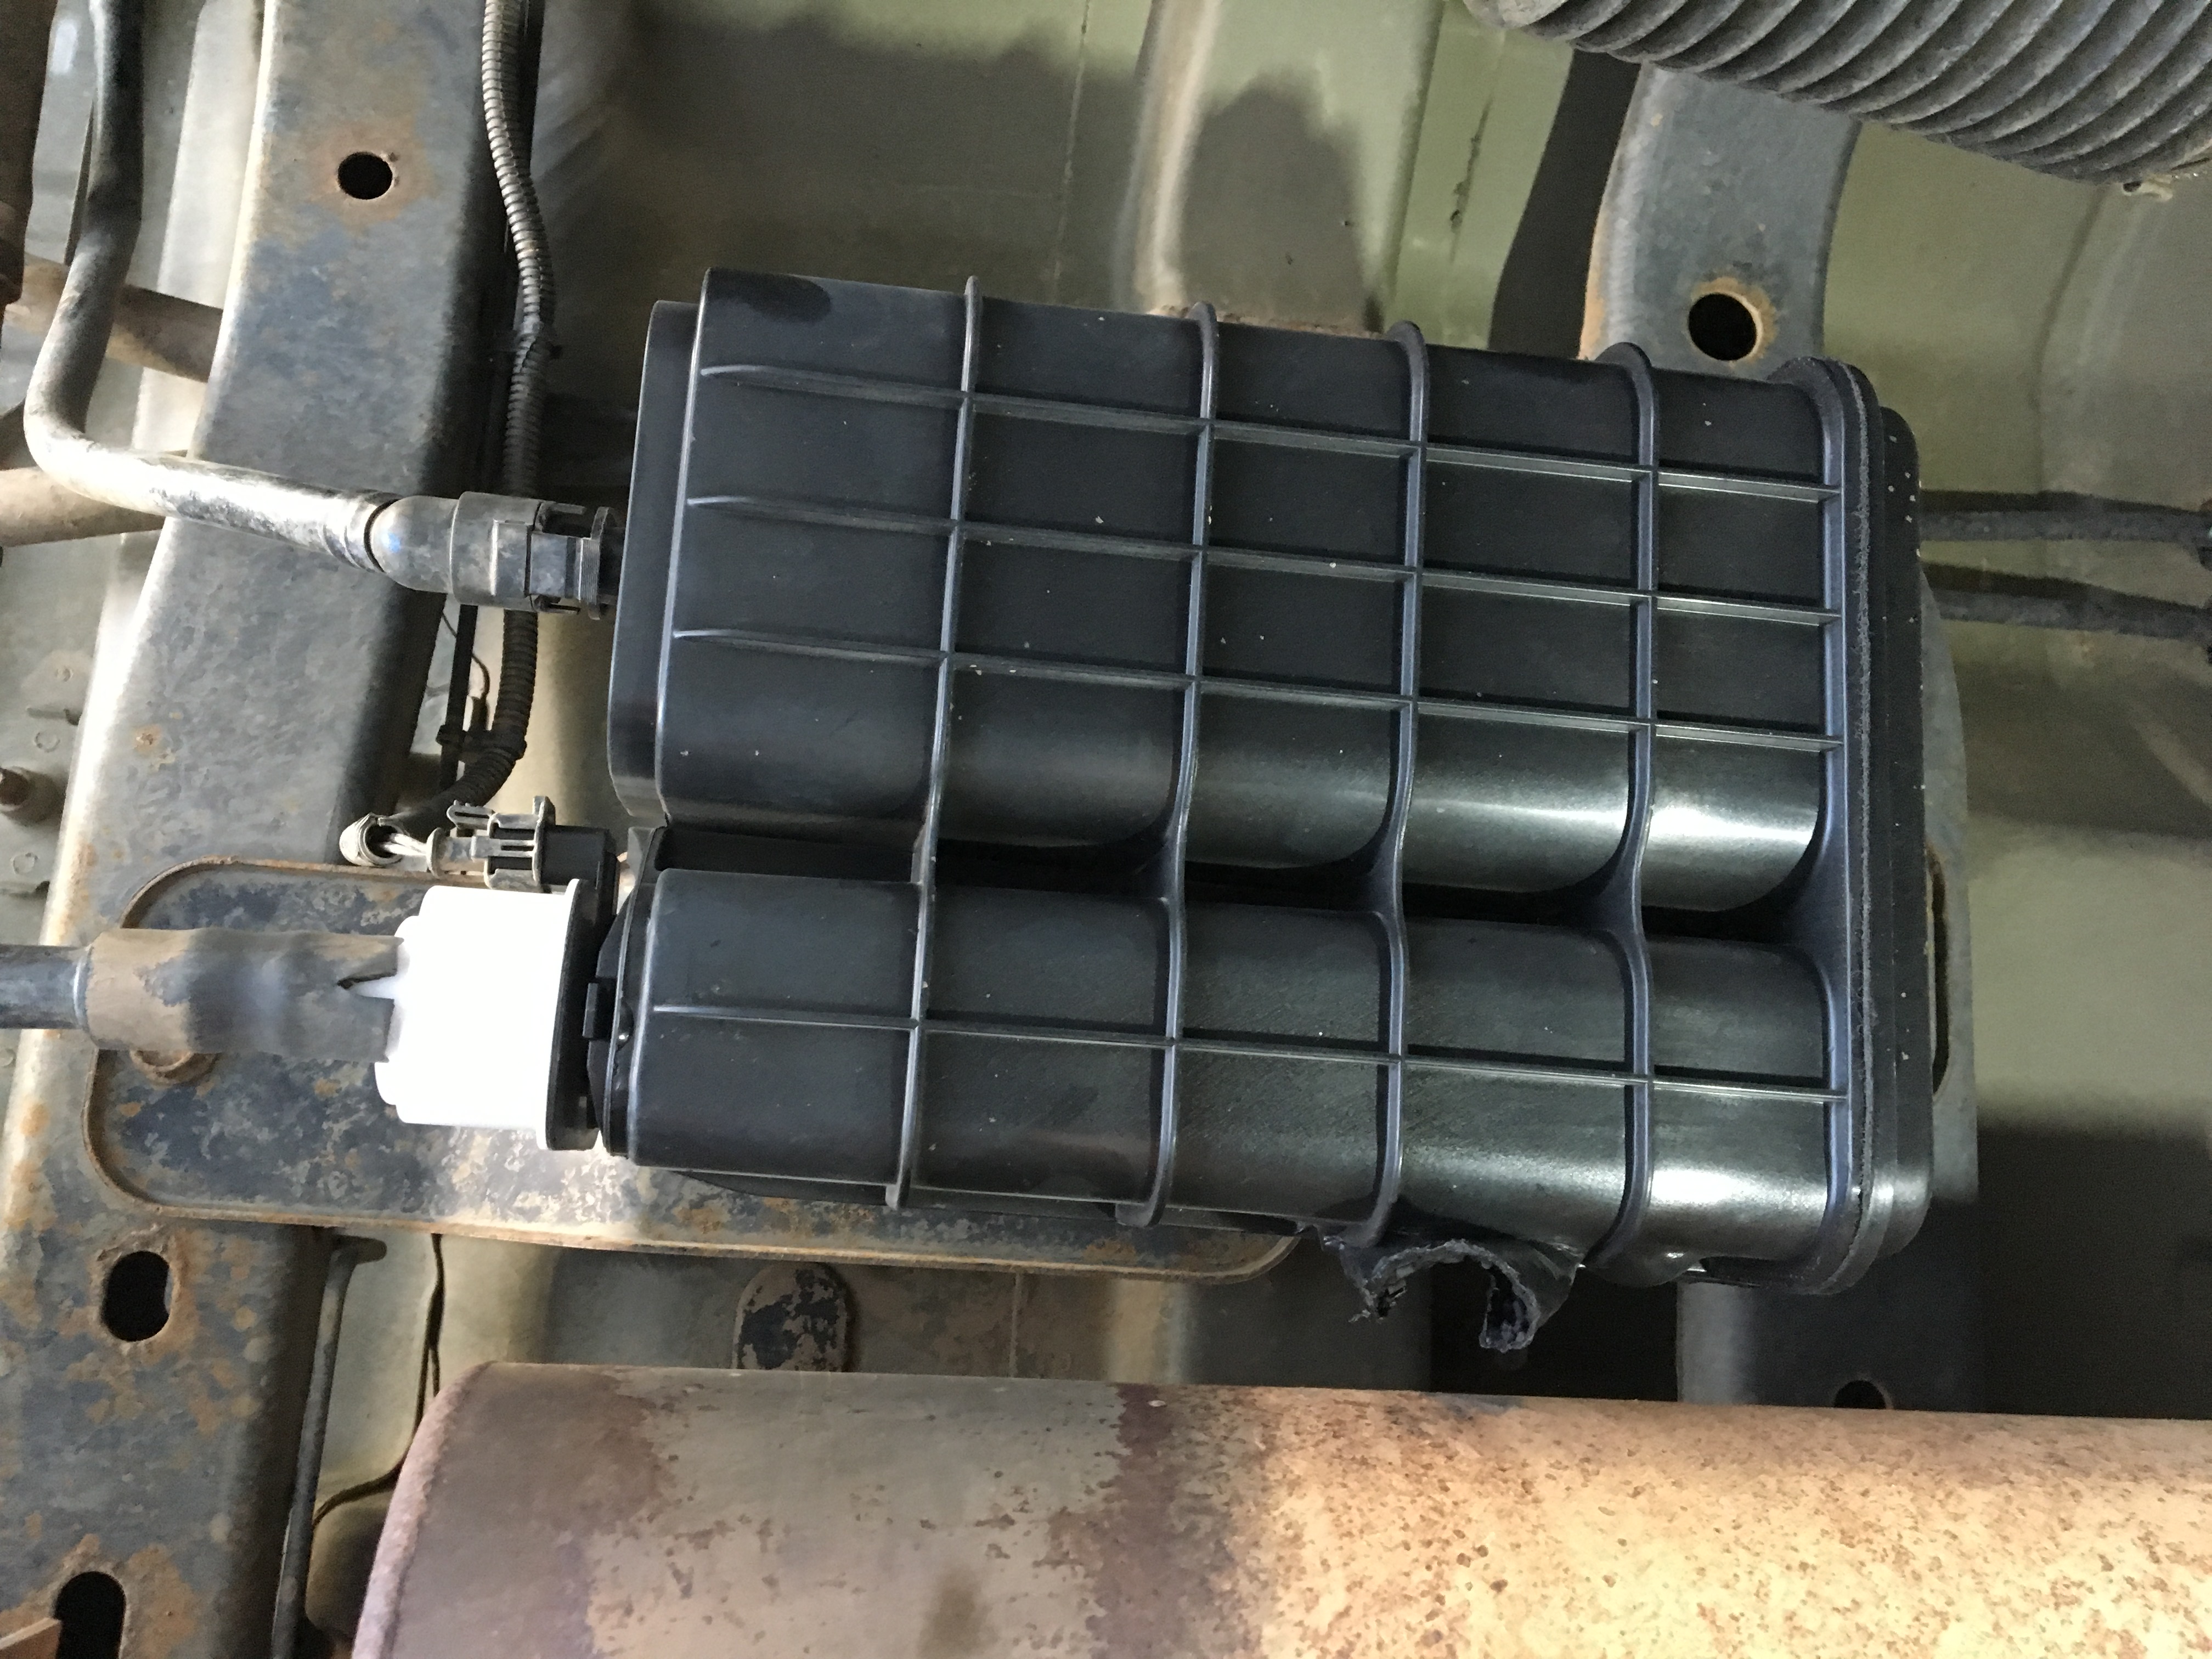 Evap canister melted | Jeep Wrangler Forum